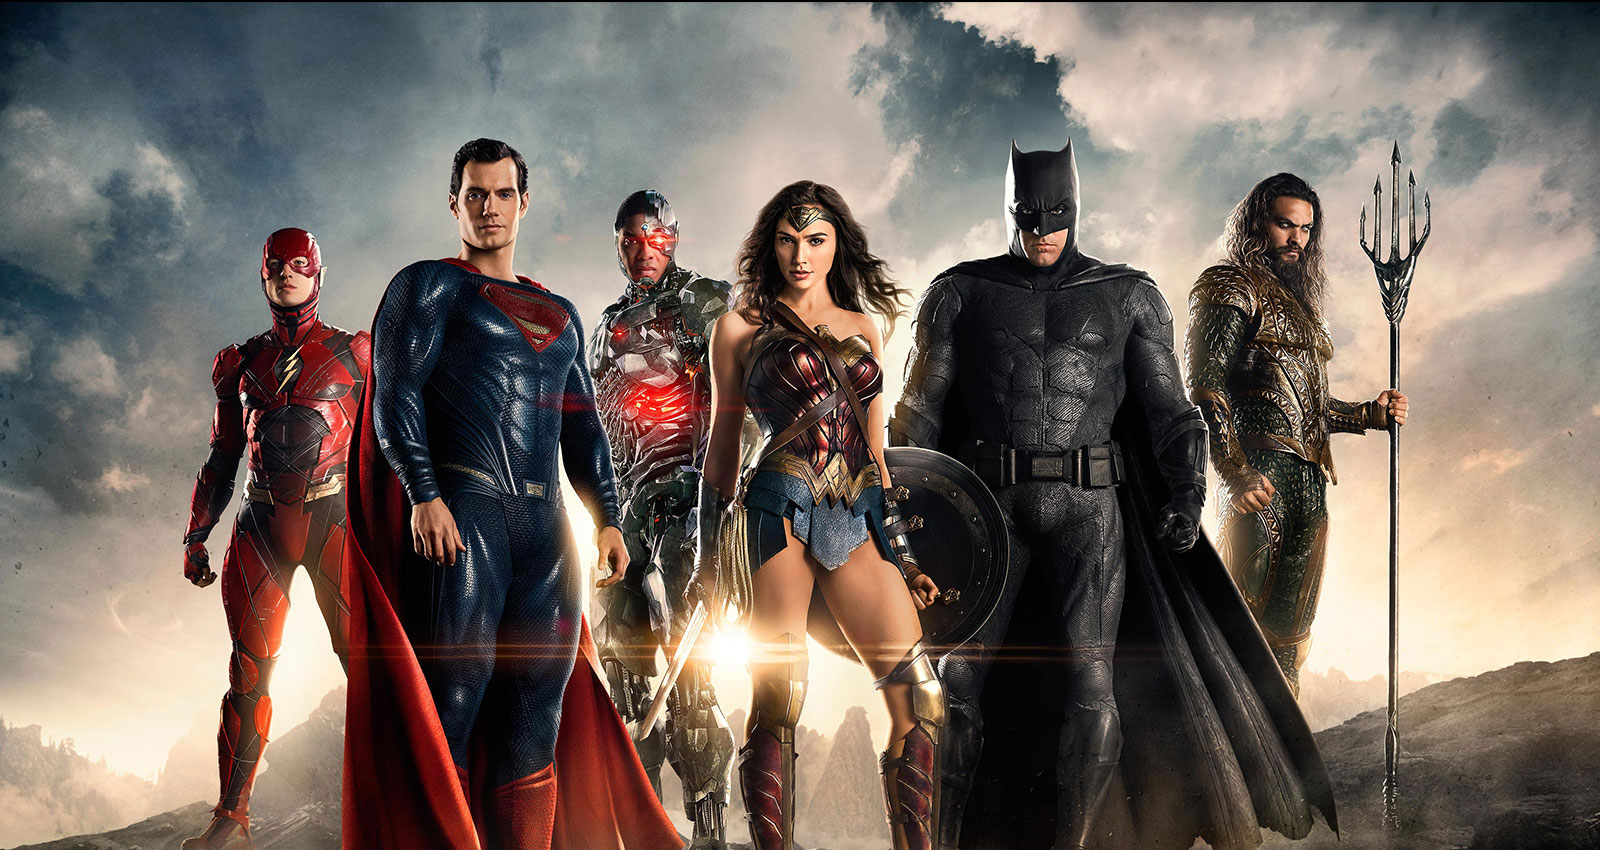 All in: where to start reading justice league